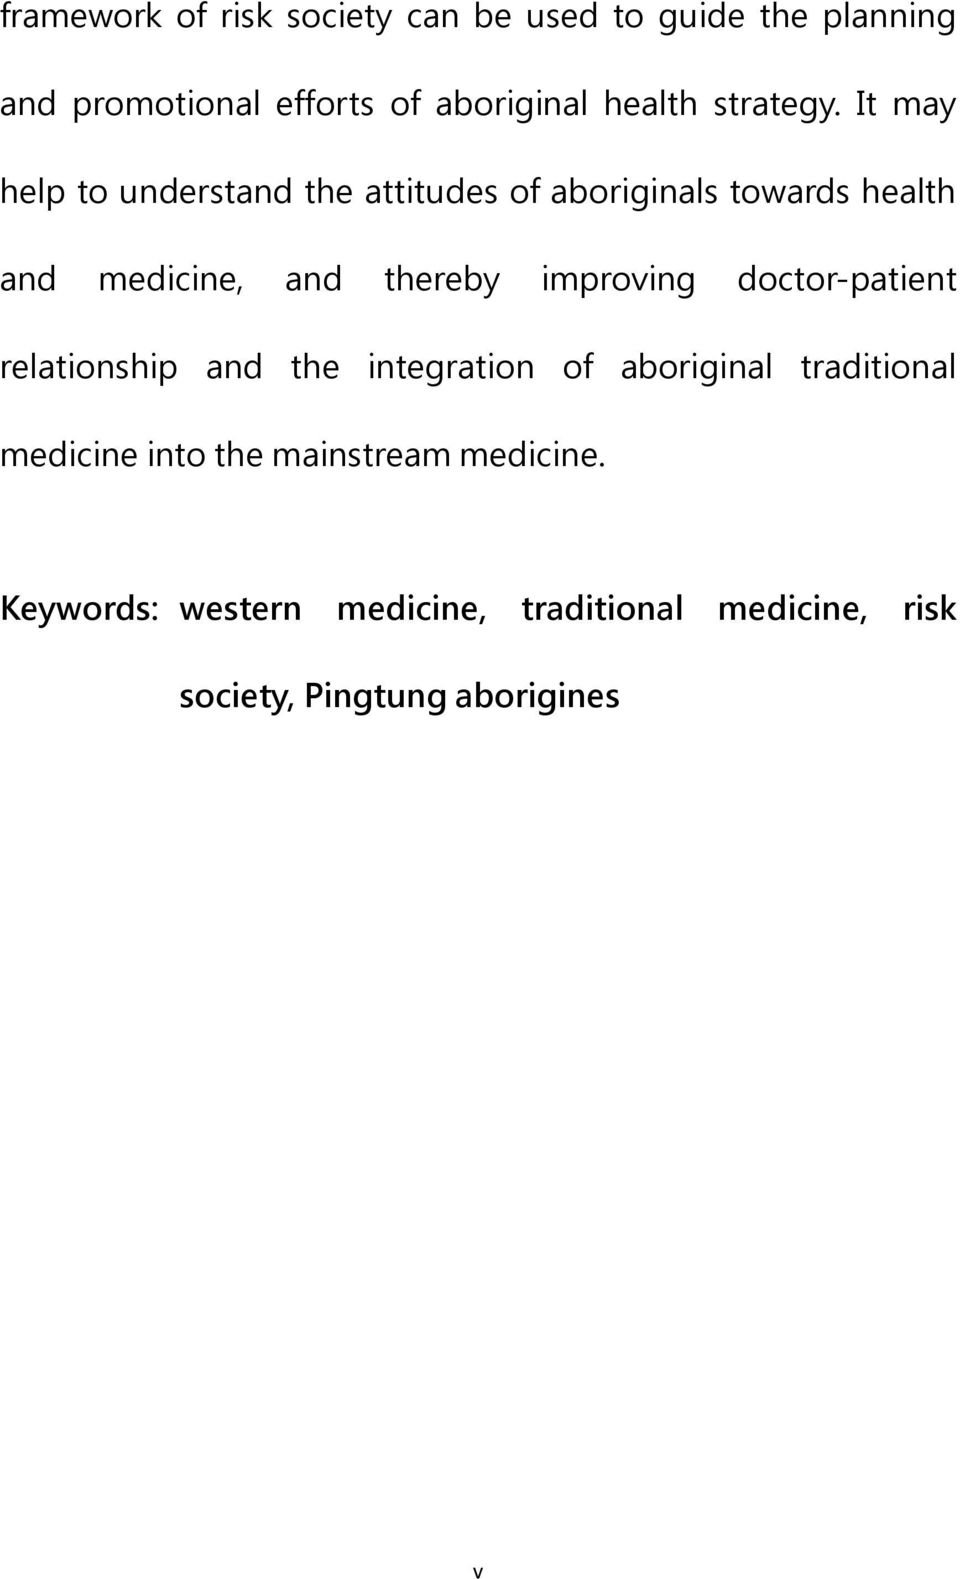 It may help to understand the attitudes of aboriginals towards health and medicine, and thereby